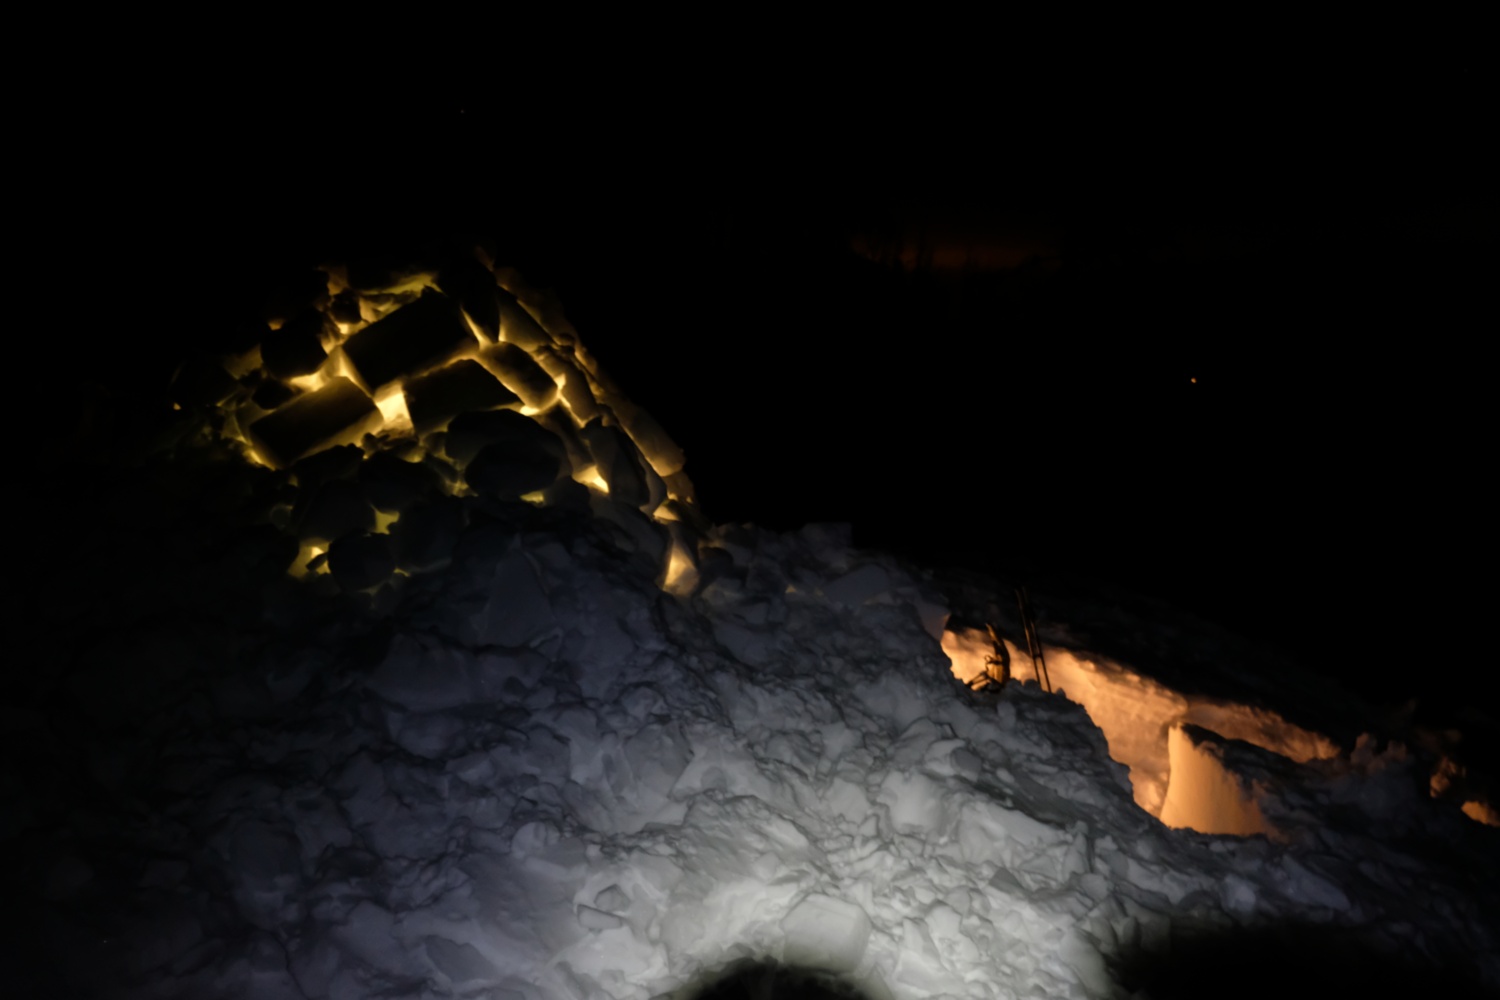 Outside the igloo at night.